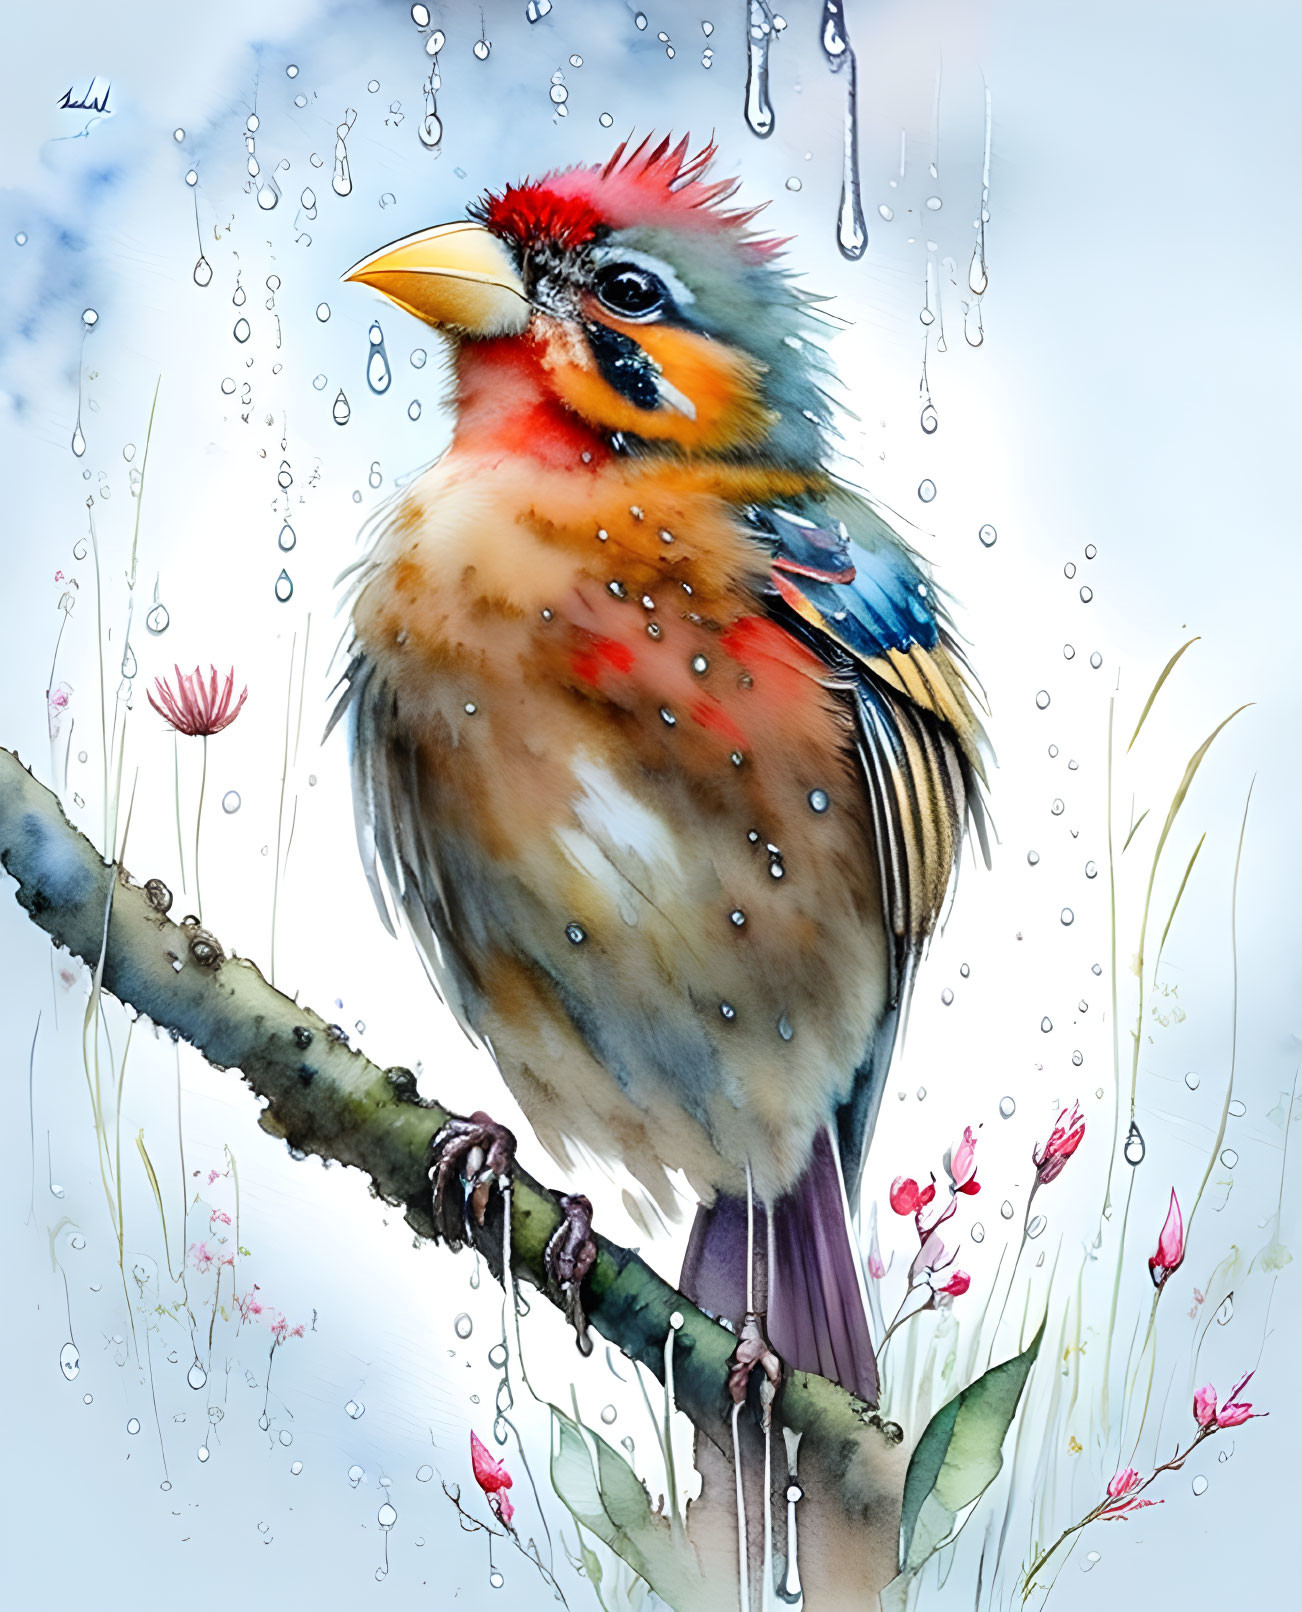 Colorful Bird Watercolor Illustration on Branch with Rain Droplets